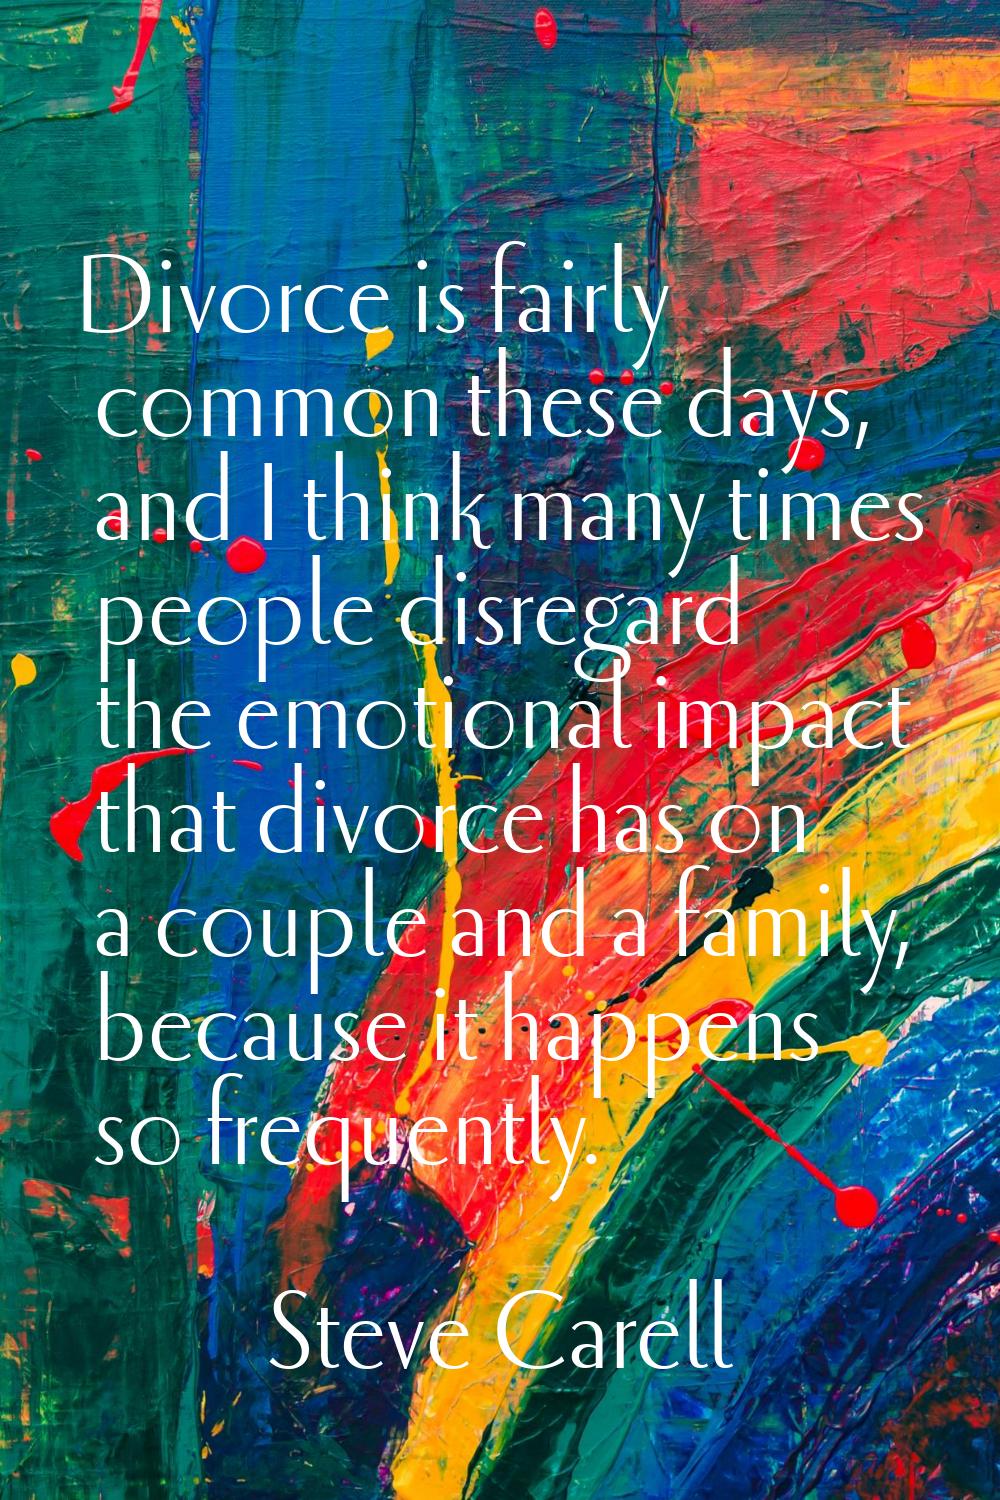 Divorce is fairly common these days, and I think many times people disregard the emotional impact t